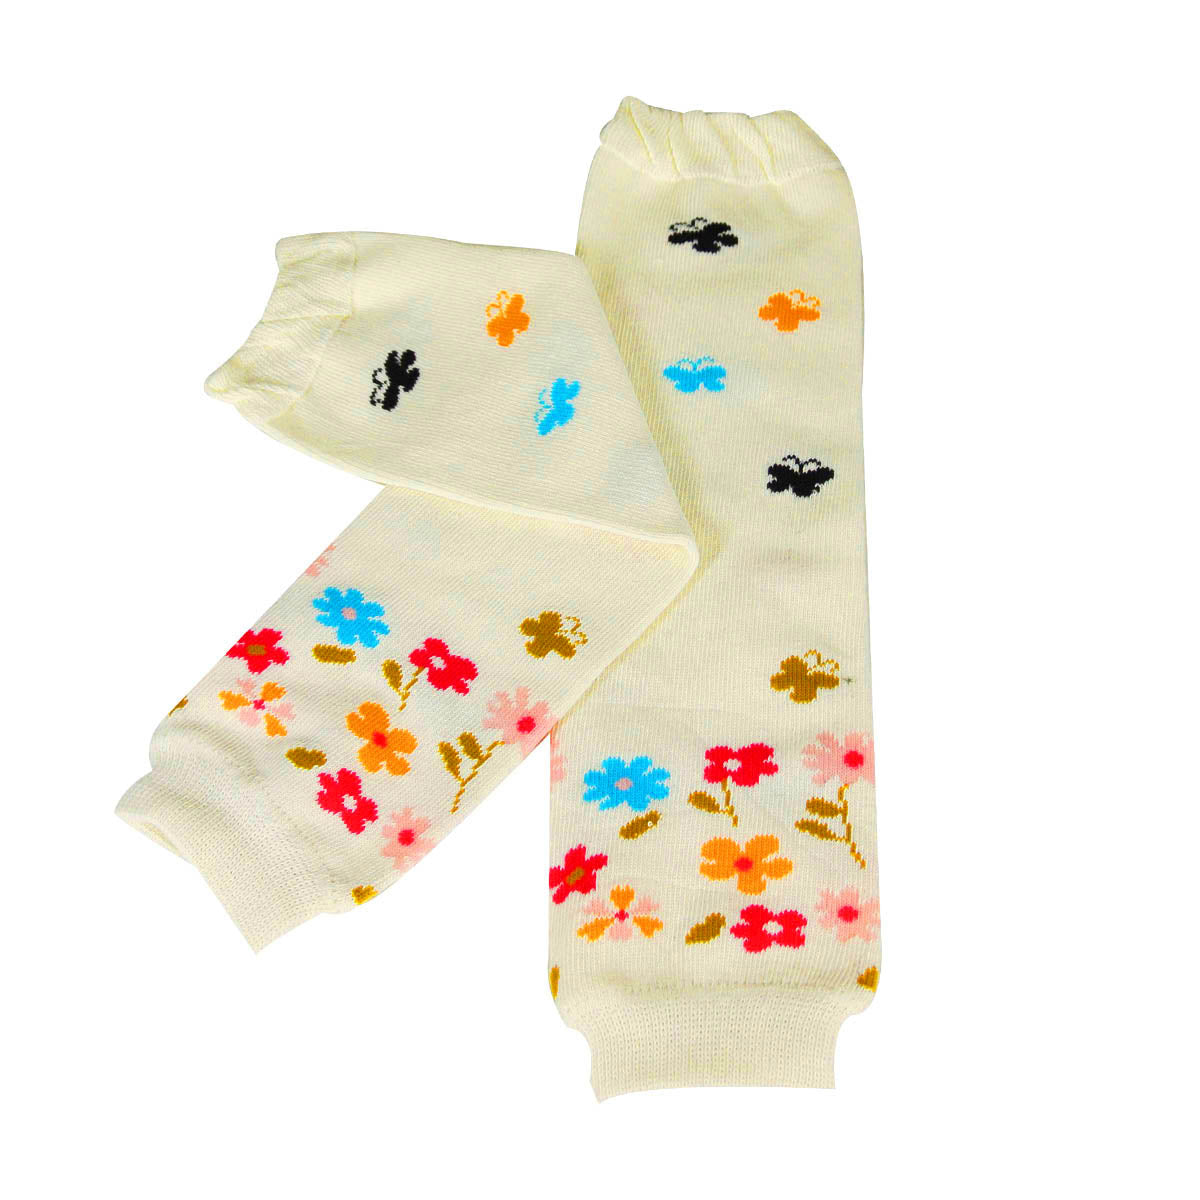 Wrapables Colorful Baby Leg Warmers